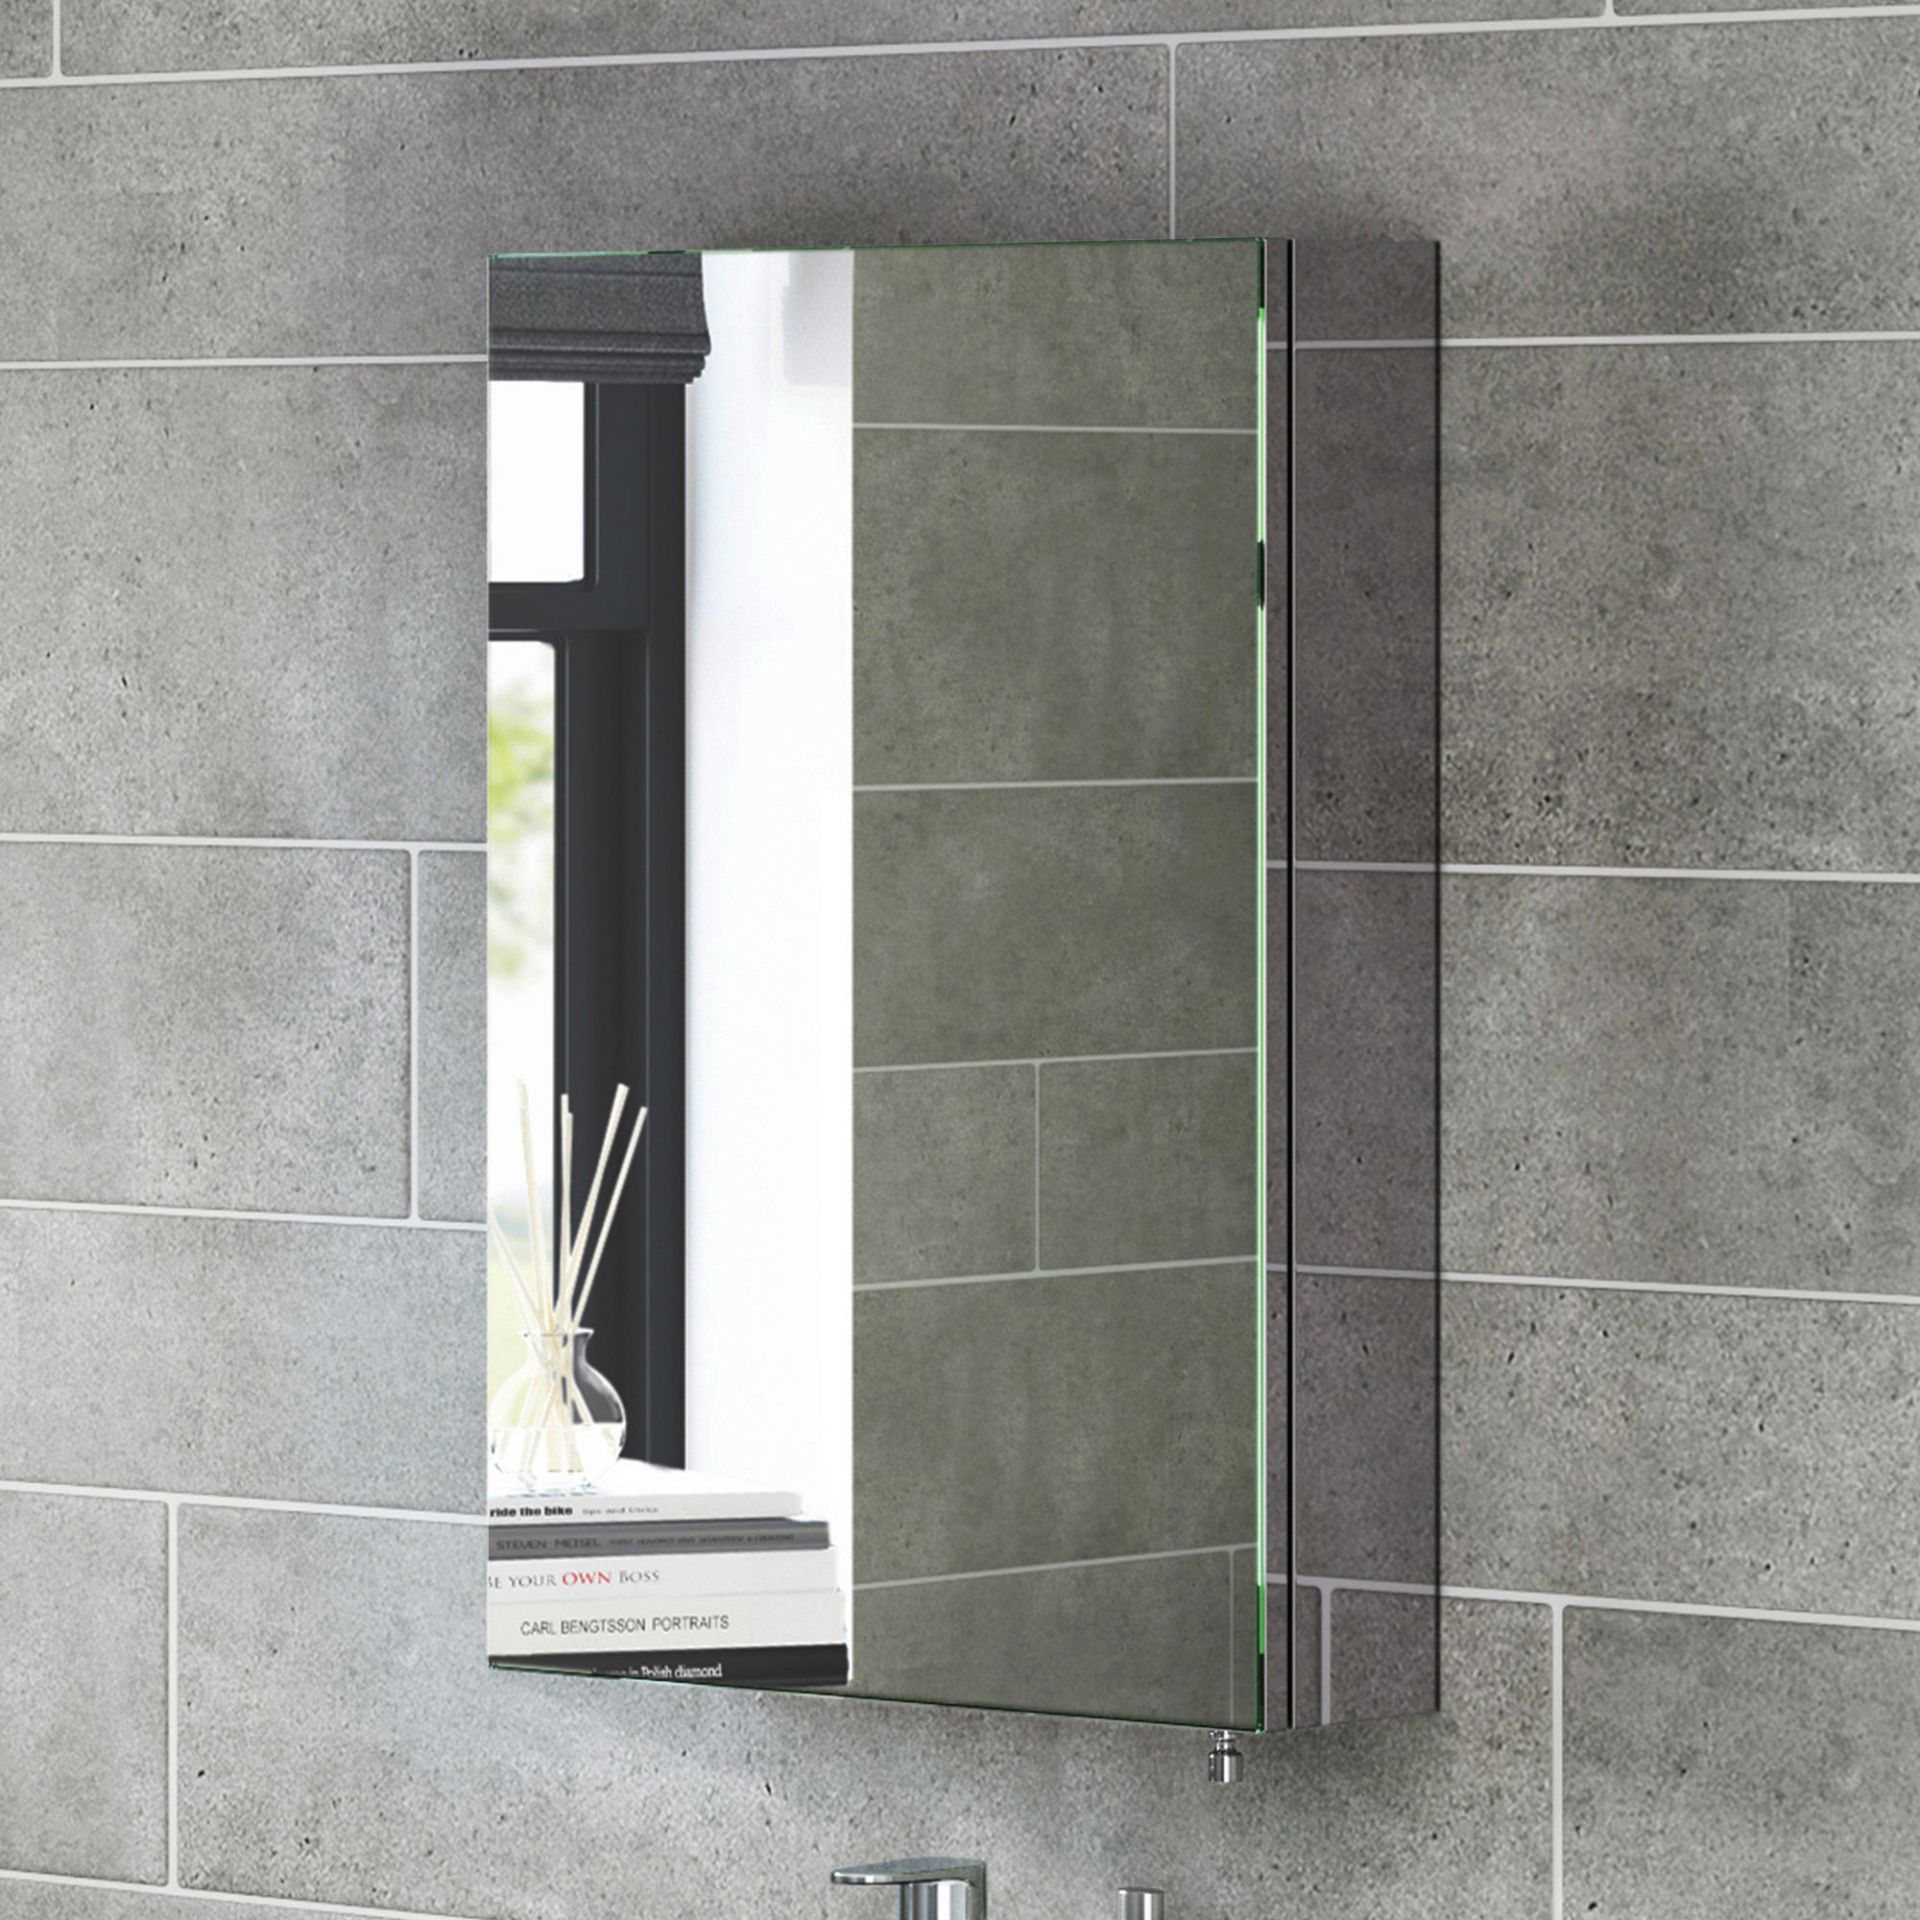 (DK20) 400x600mm Liberty Stainless Steel Single Door Mirror Cabinet. RRP £199.99. Made from high-